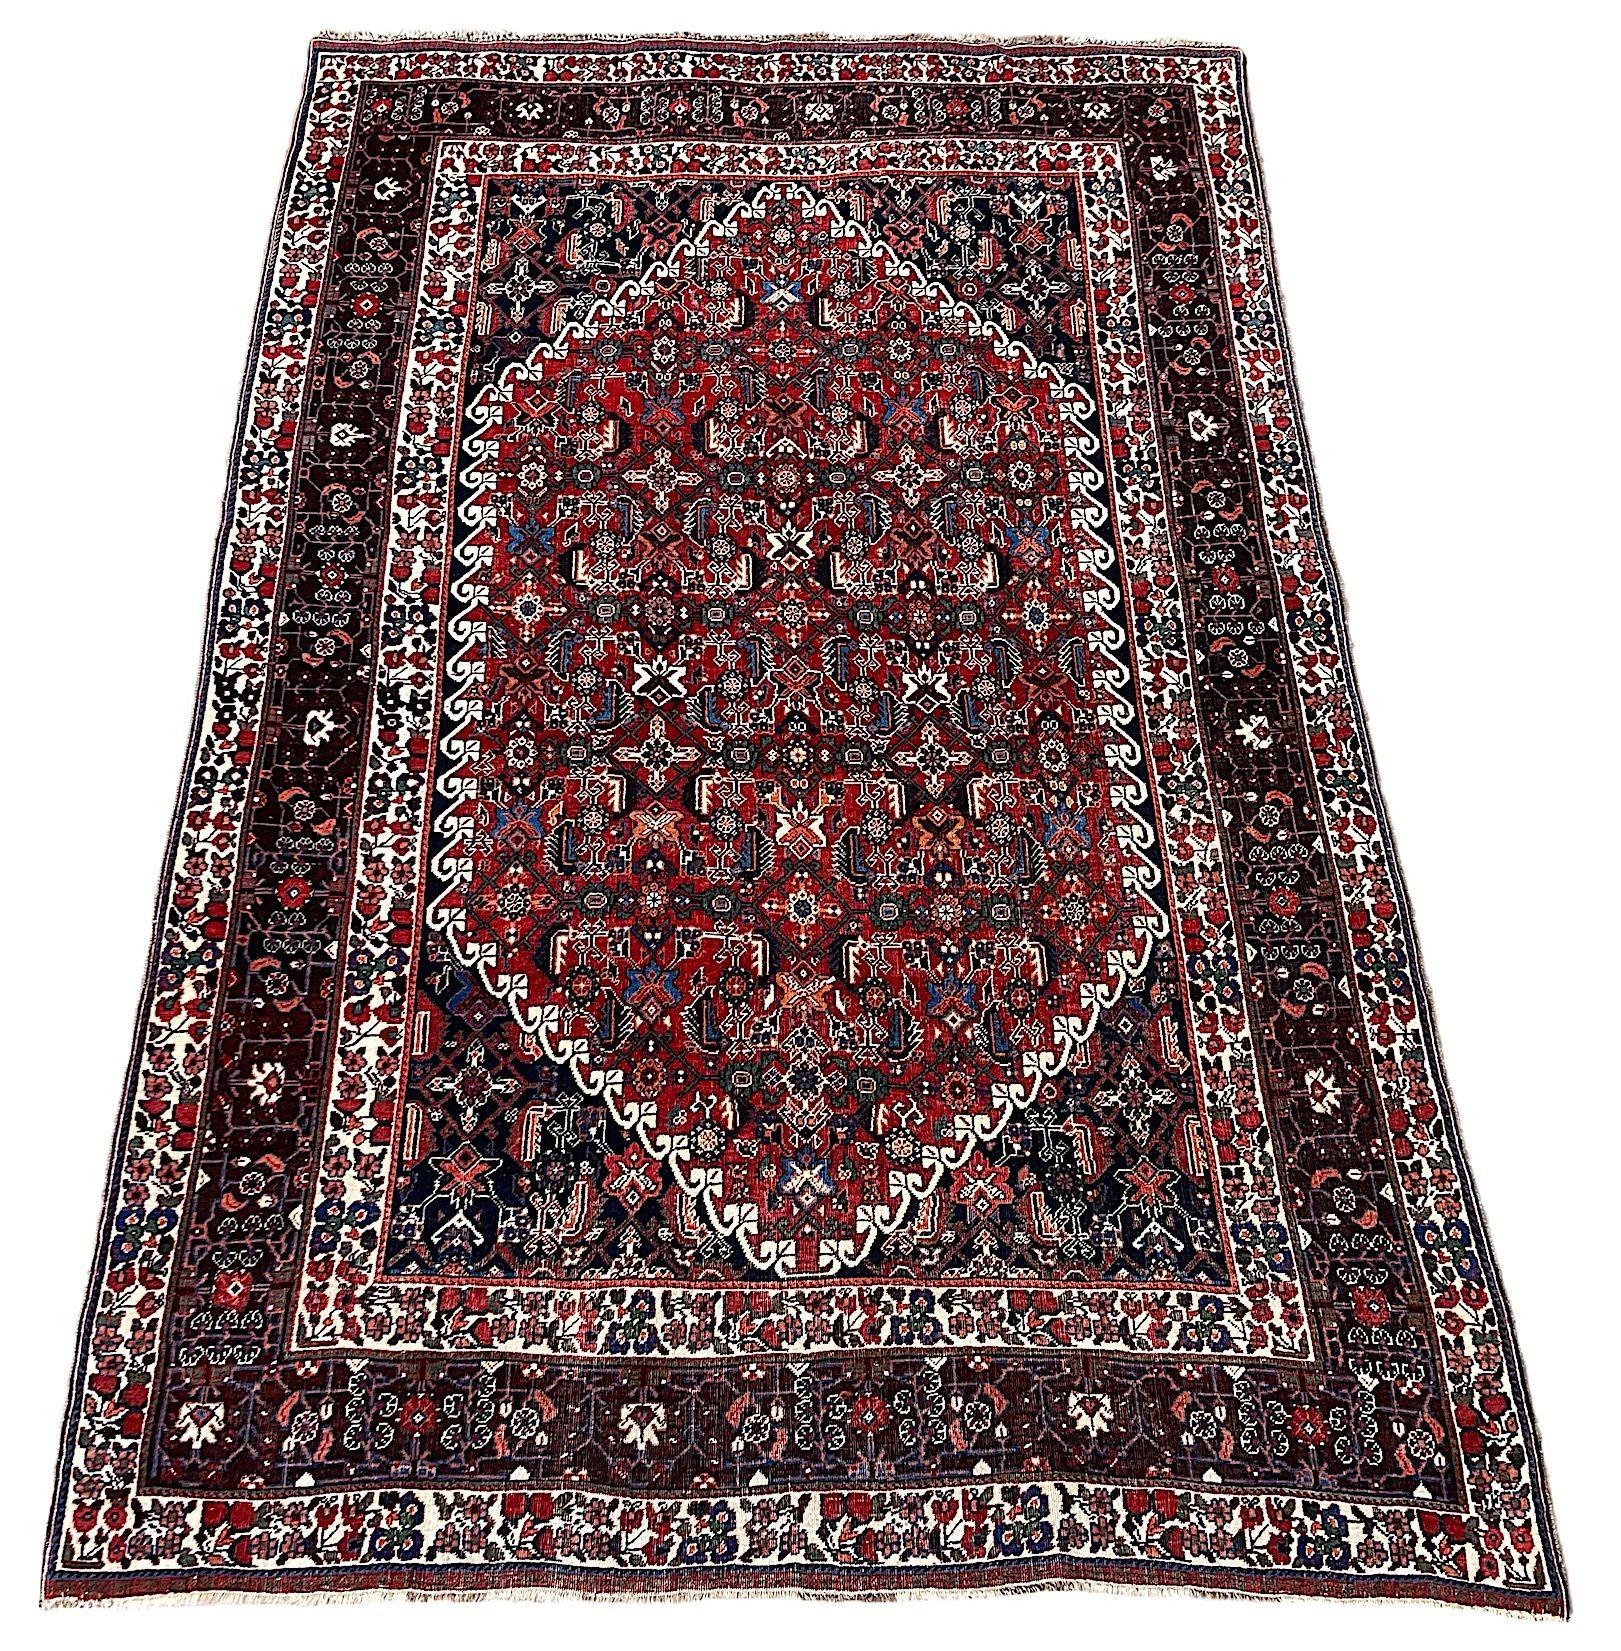 A lovely antique Qashqai rug, handwoven by the eponymous nomadic tribe circa 1910. The rug features an allover design on a rich terracotta field and great secondary colours of greens, pinks and blues. Finely woven and a great example of tribal